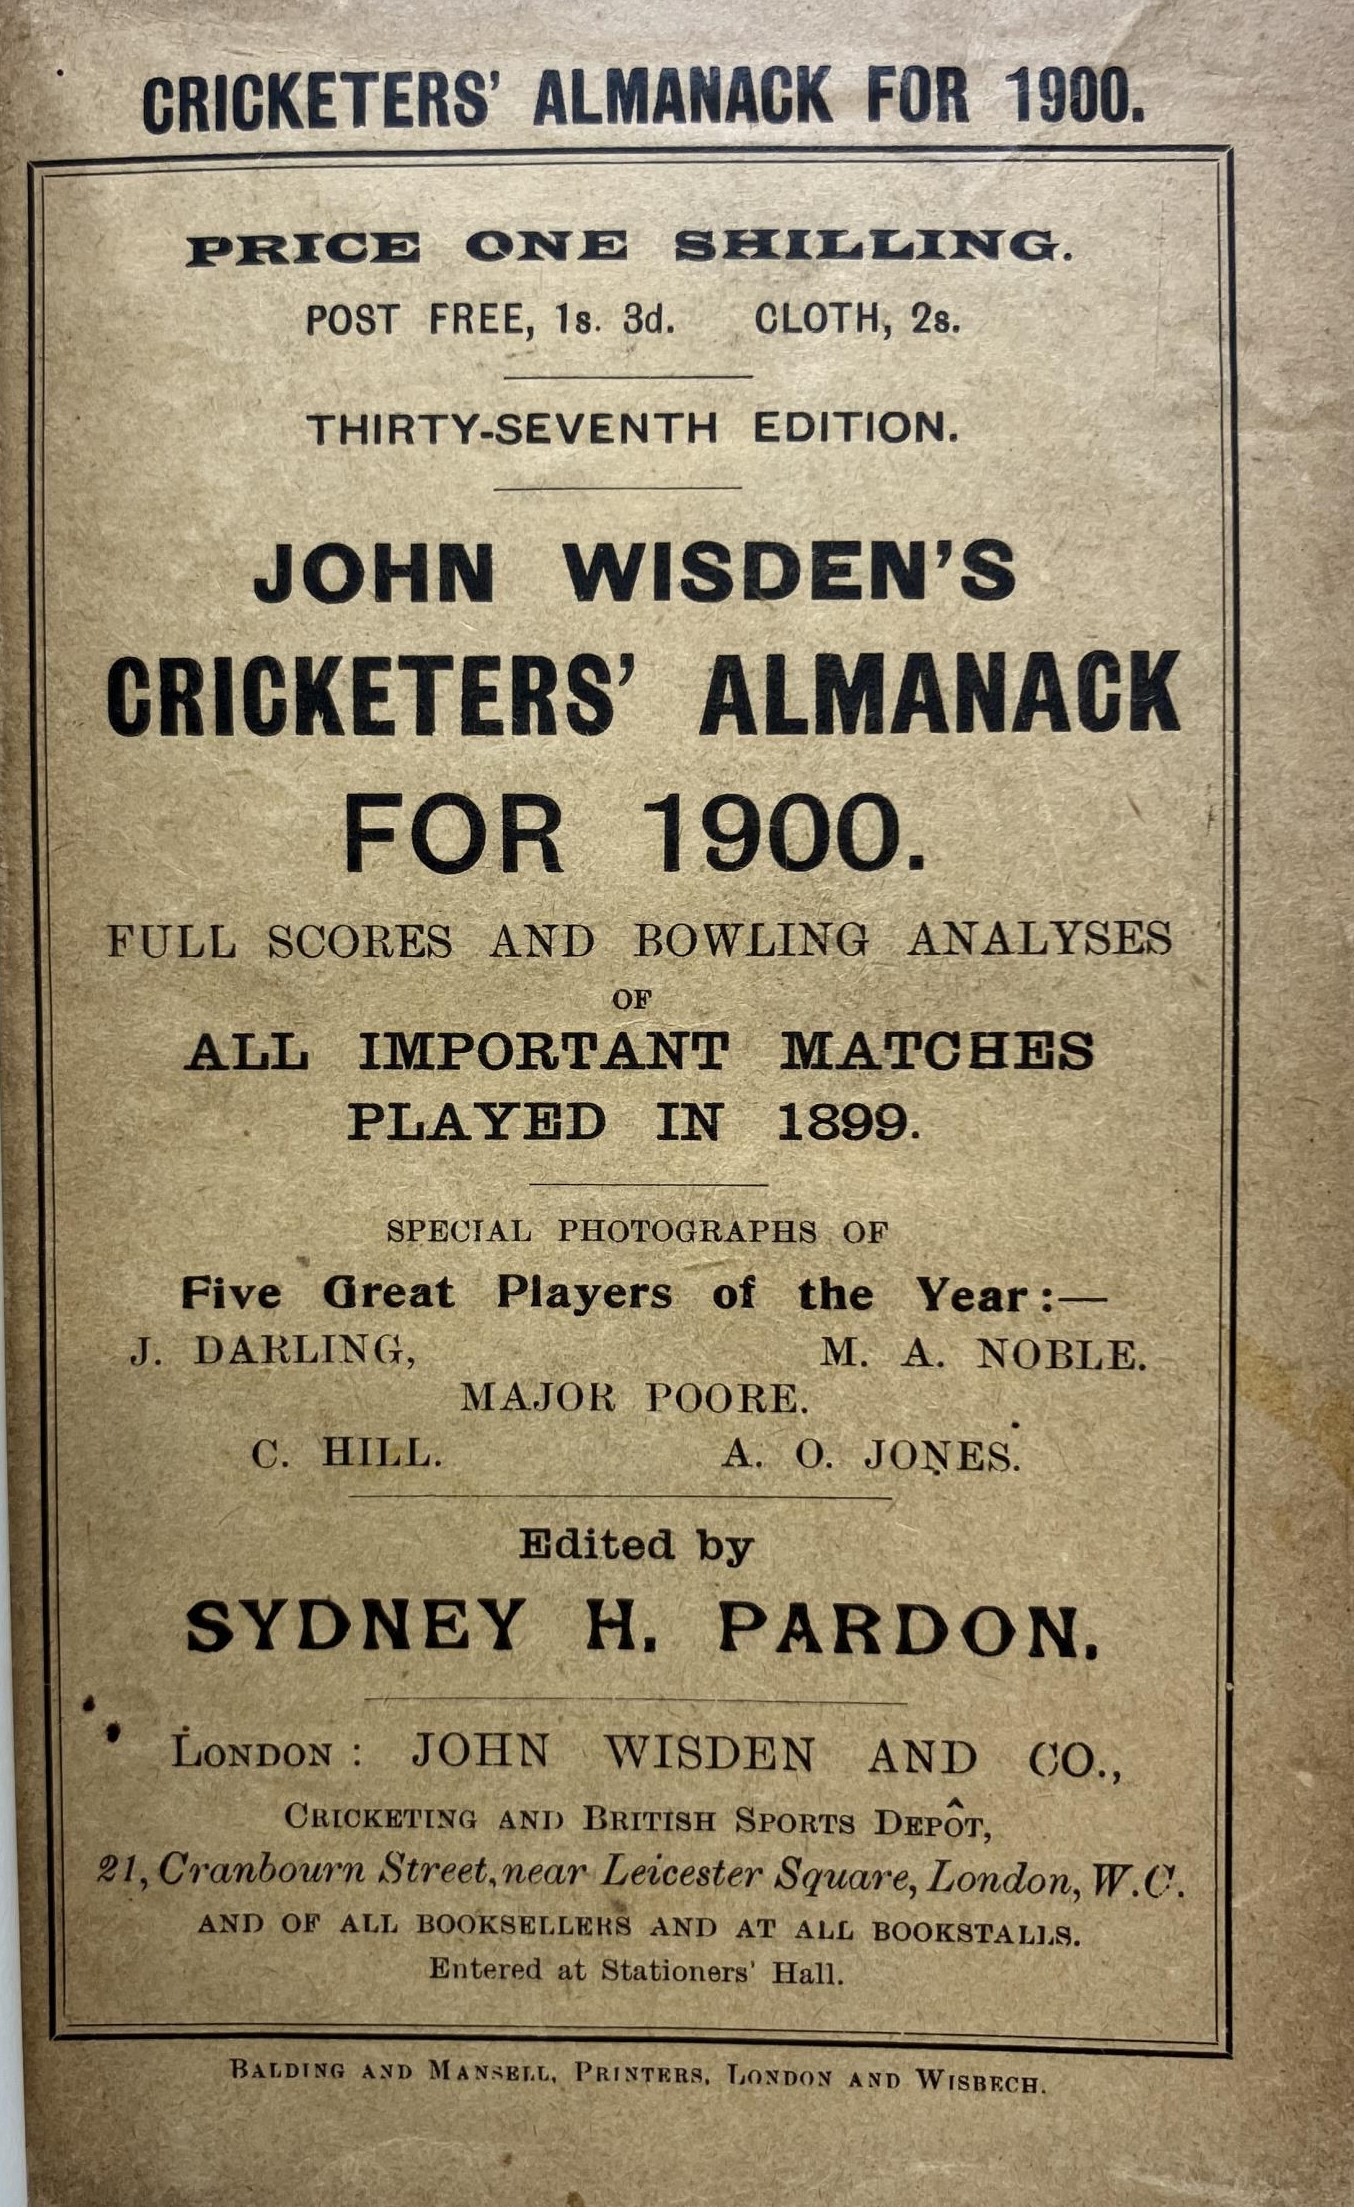 A Wisden Cricketers' Almanack, 1900  Provenance:  From the Harry Brewer Cricket Memorabilia - Image 3 of 4